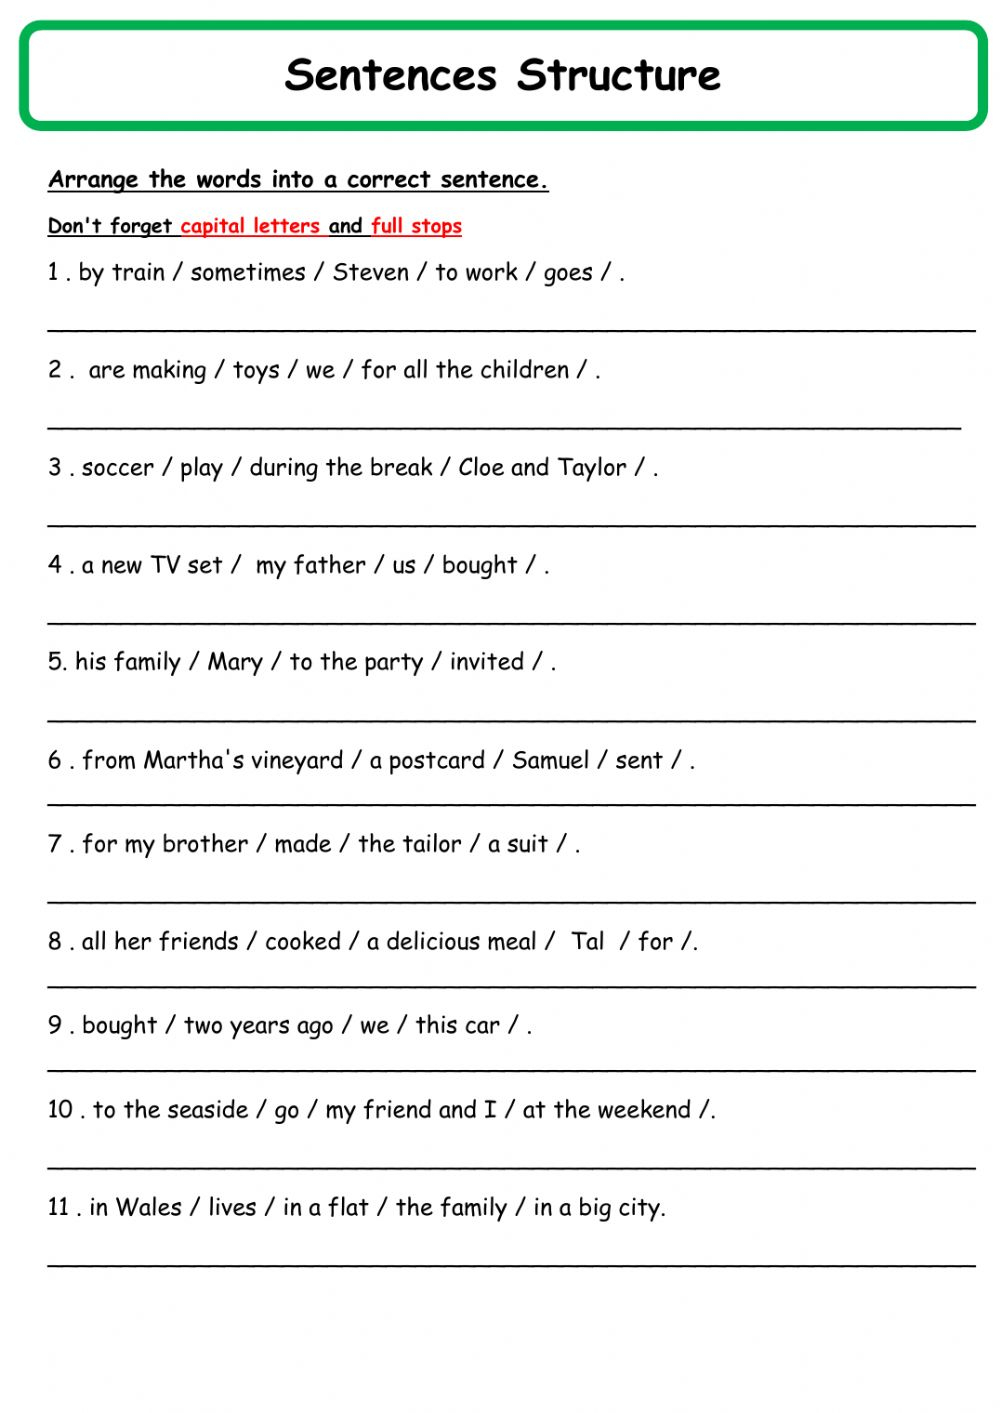 Sentence Structure Online Exercise